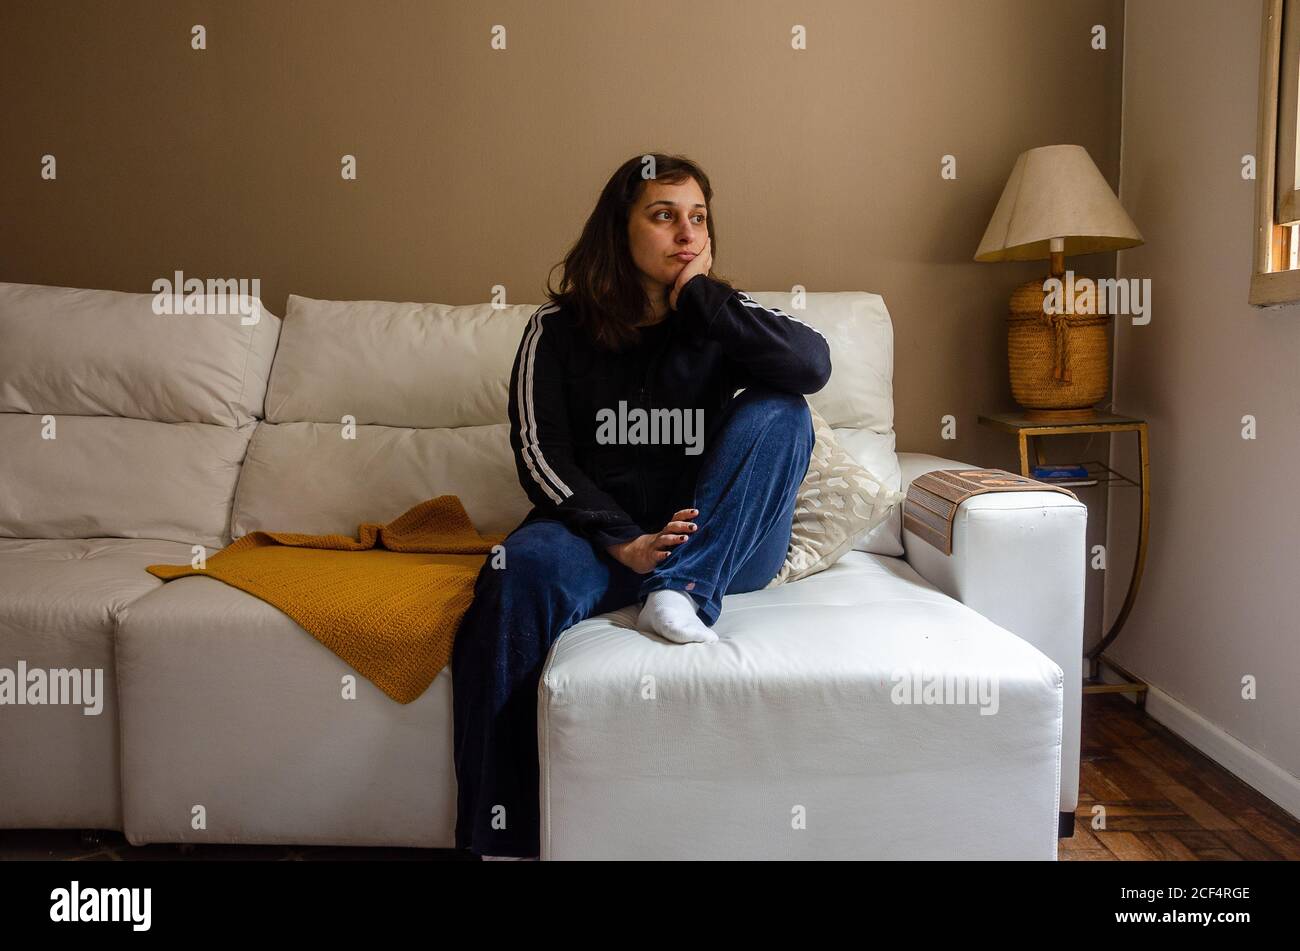 young latin woman sitting on a white couch looking contemplative Stock Photo